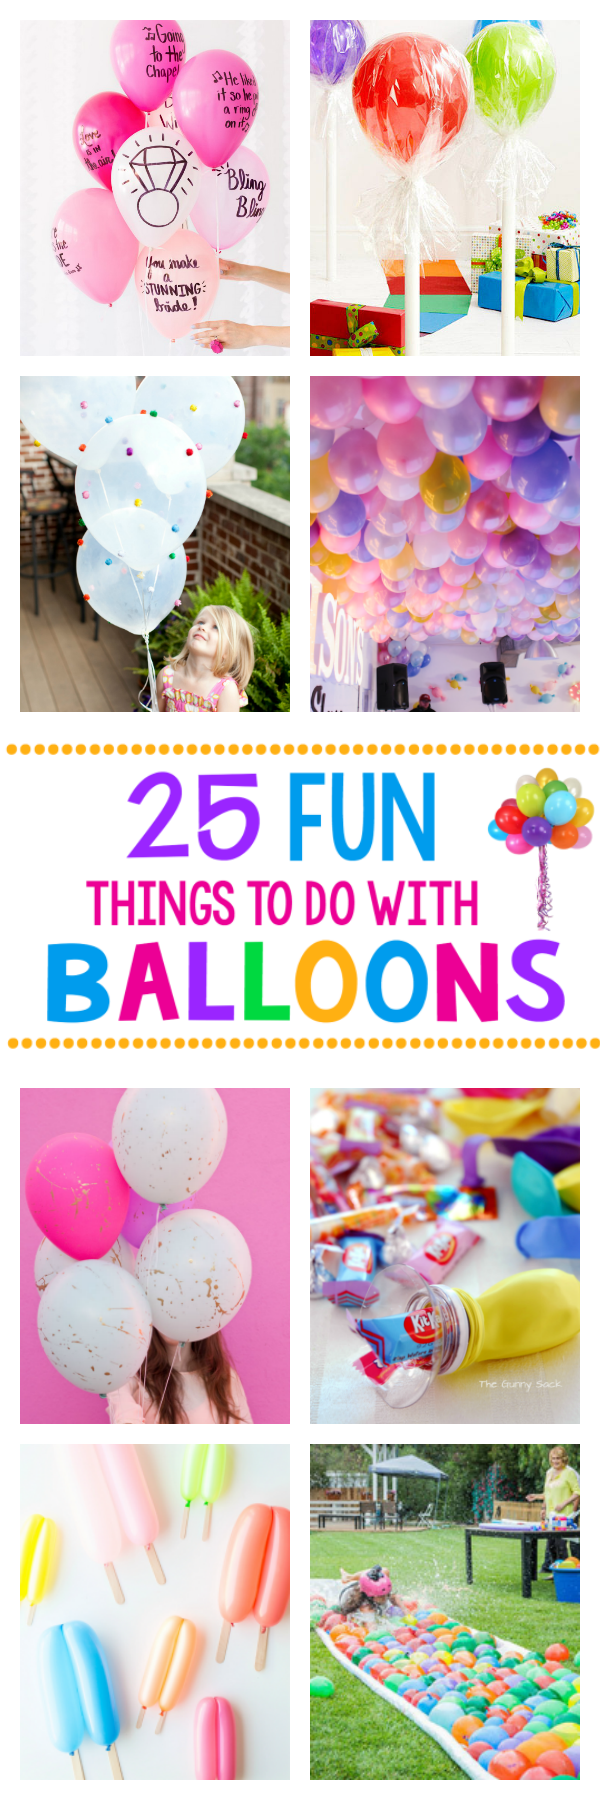 25 Fun Things to do with Balloons